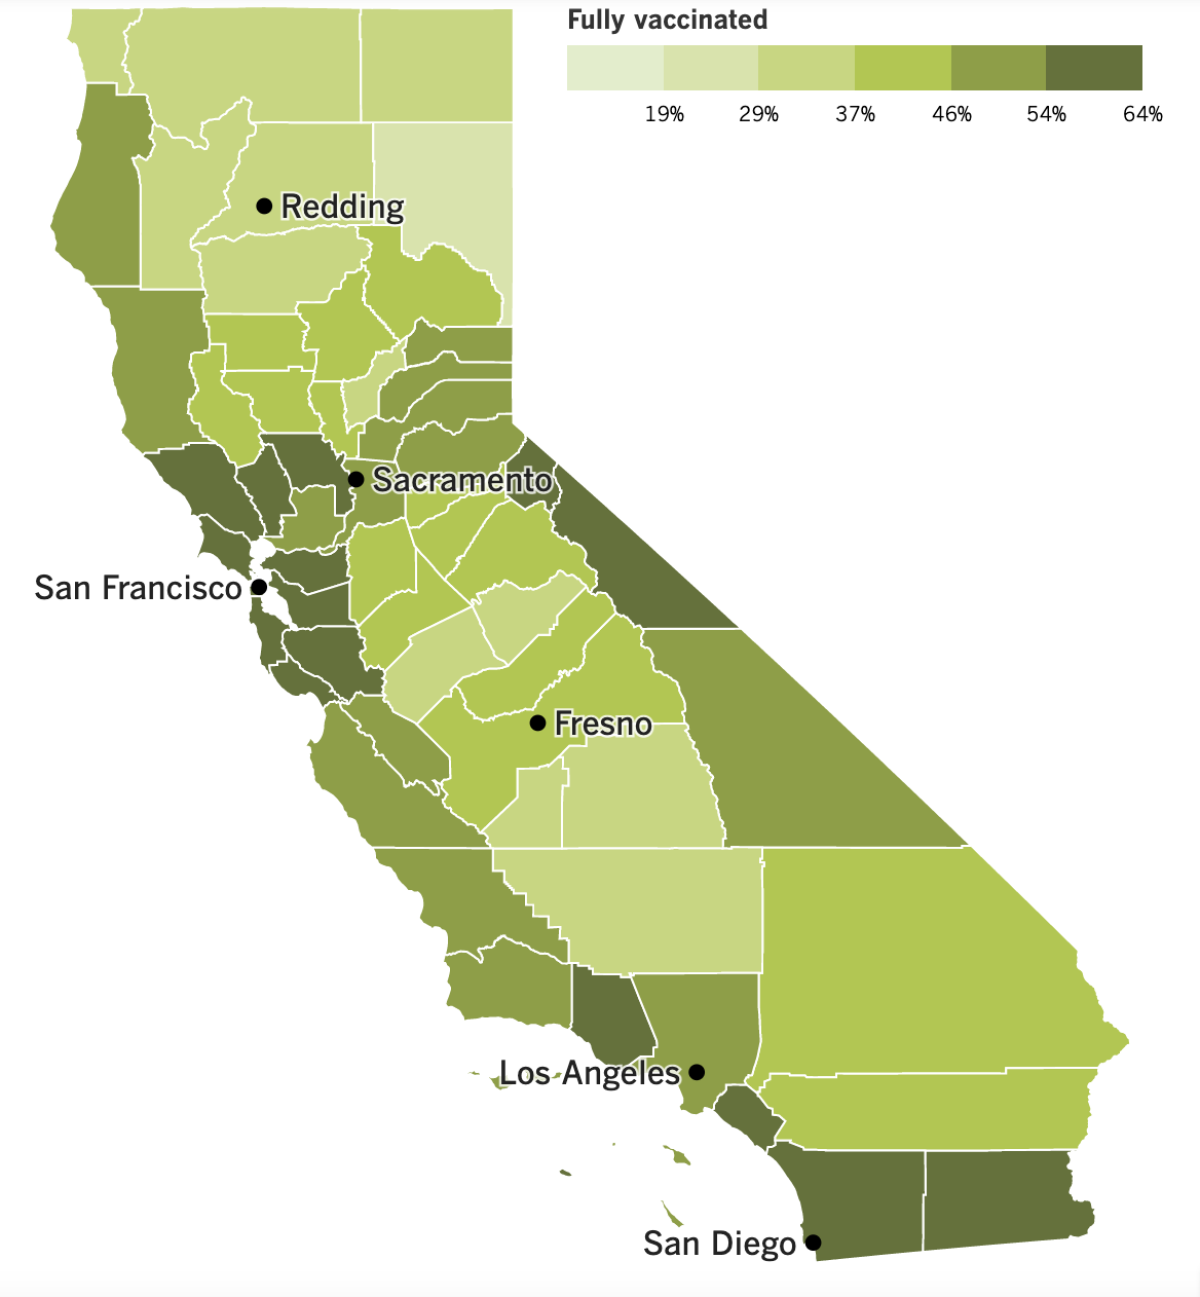 A map showing California's COVID-19 vaccination rates by county.